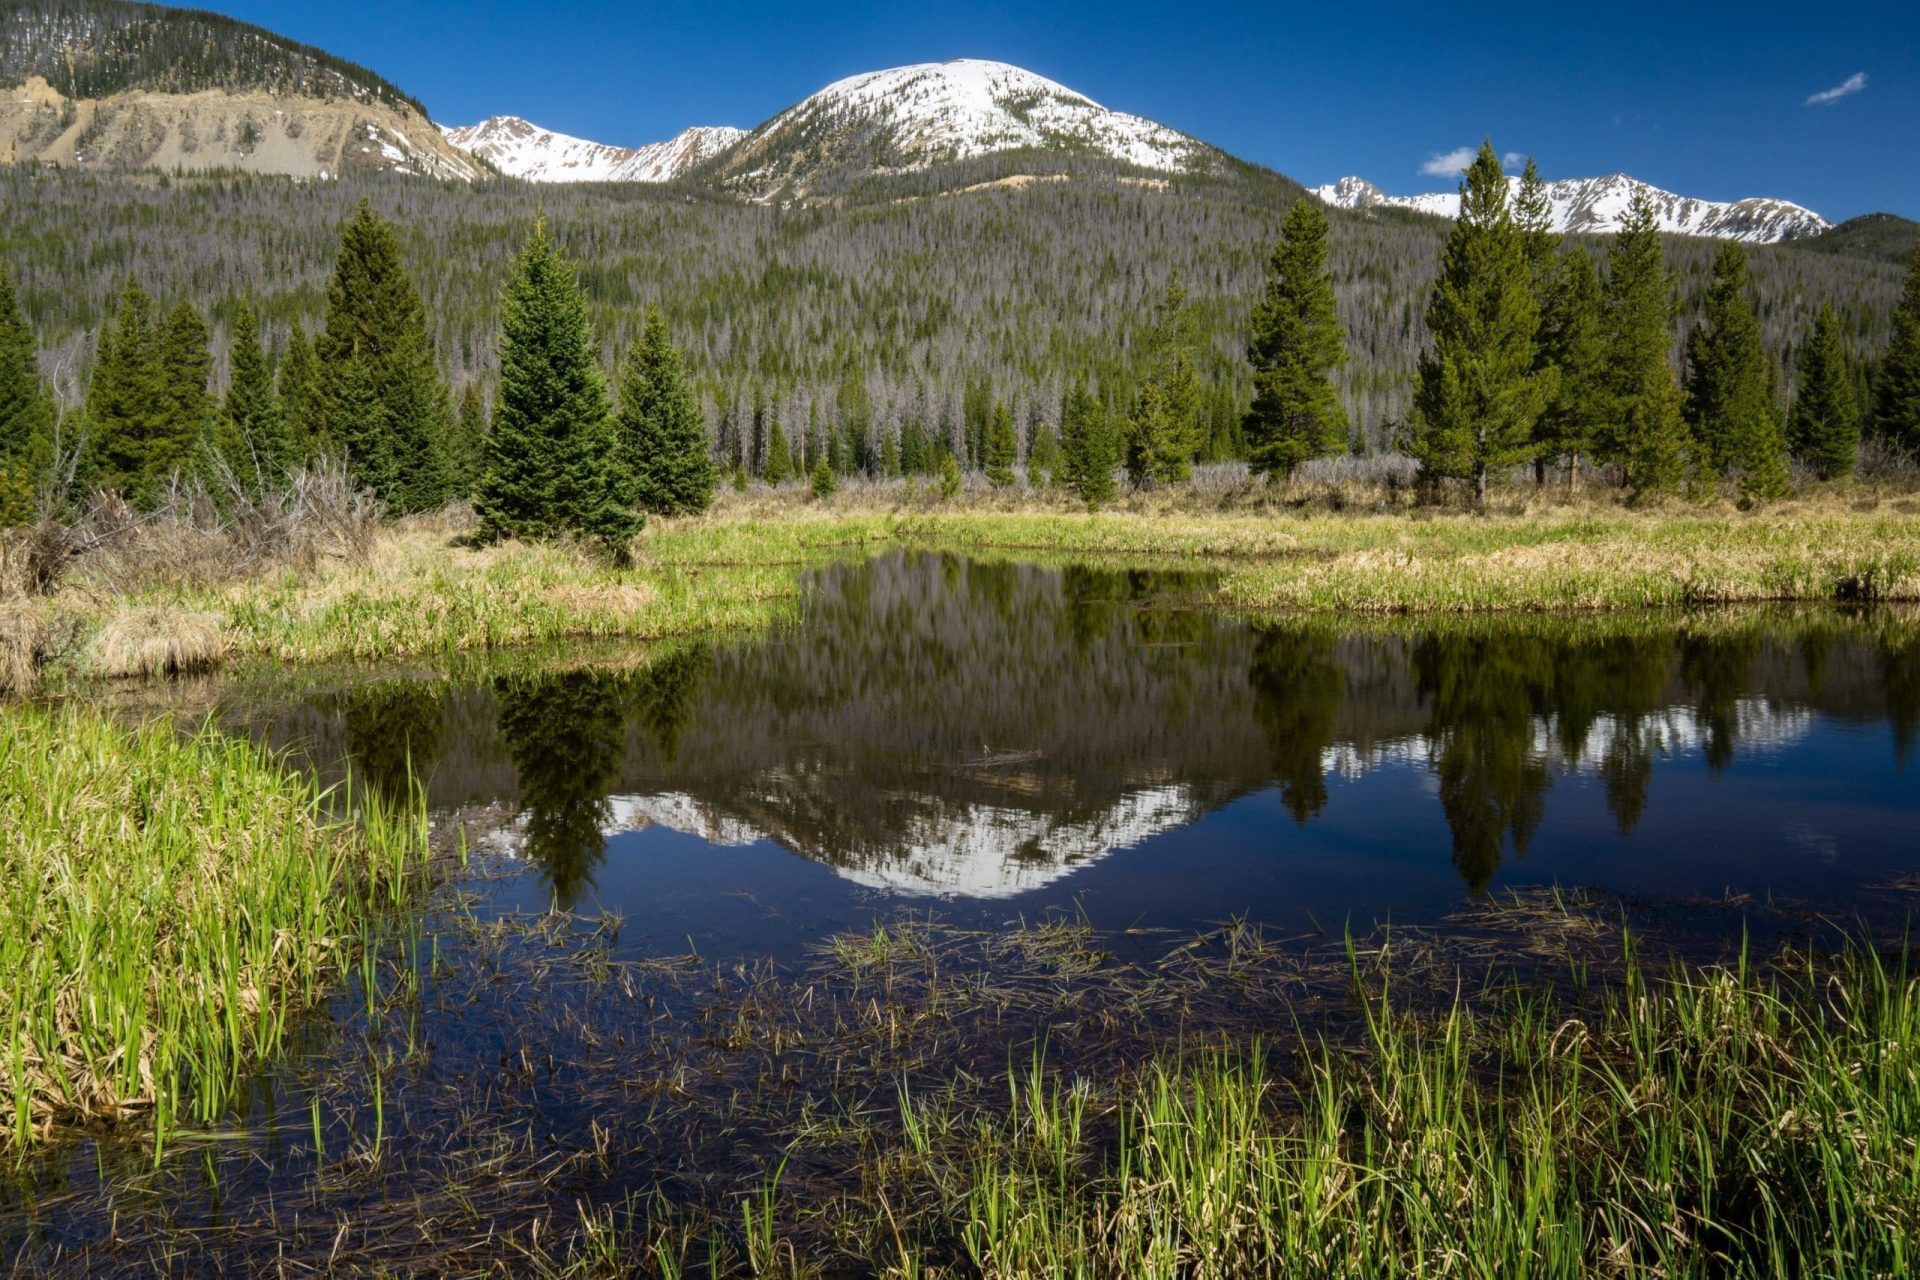 How Much Does It Cost to Drive Through Rocky Mountain National Park?